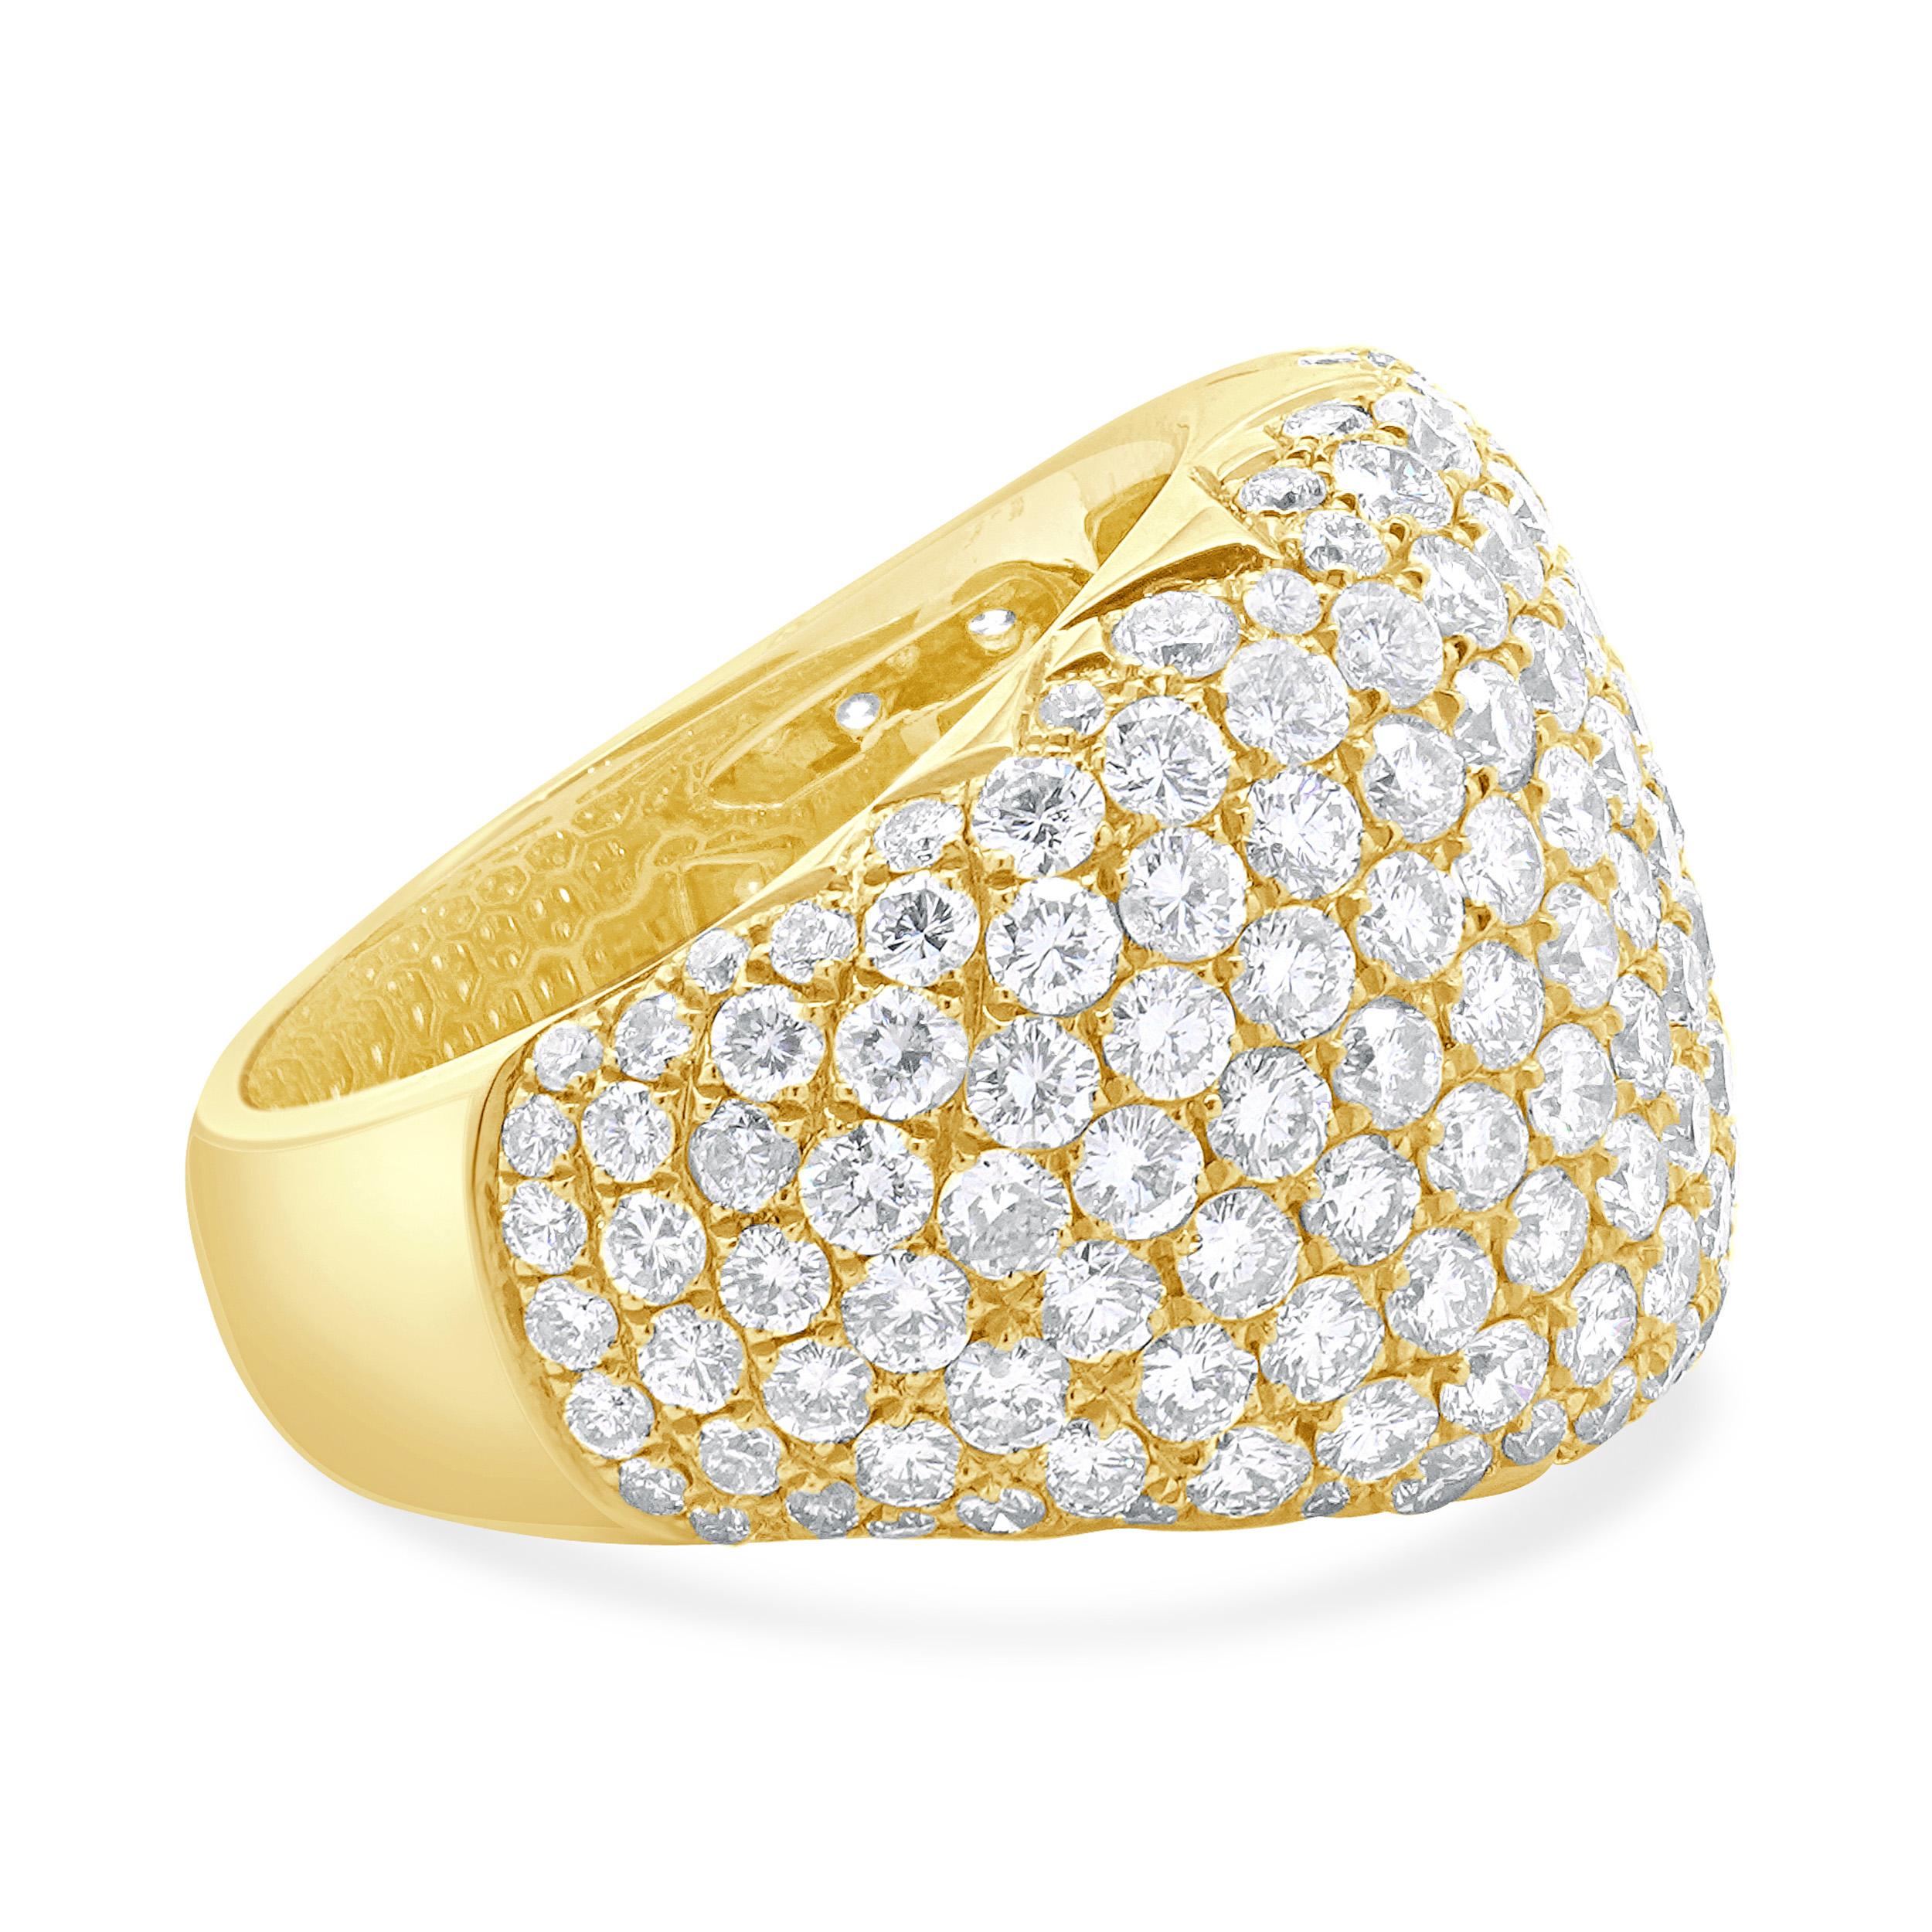 18 Karat Yellow Gold Domed Diamond Ring In Excellent Condition For Sale In Scottsdale, AZ